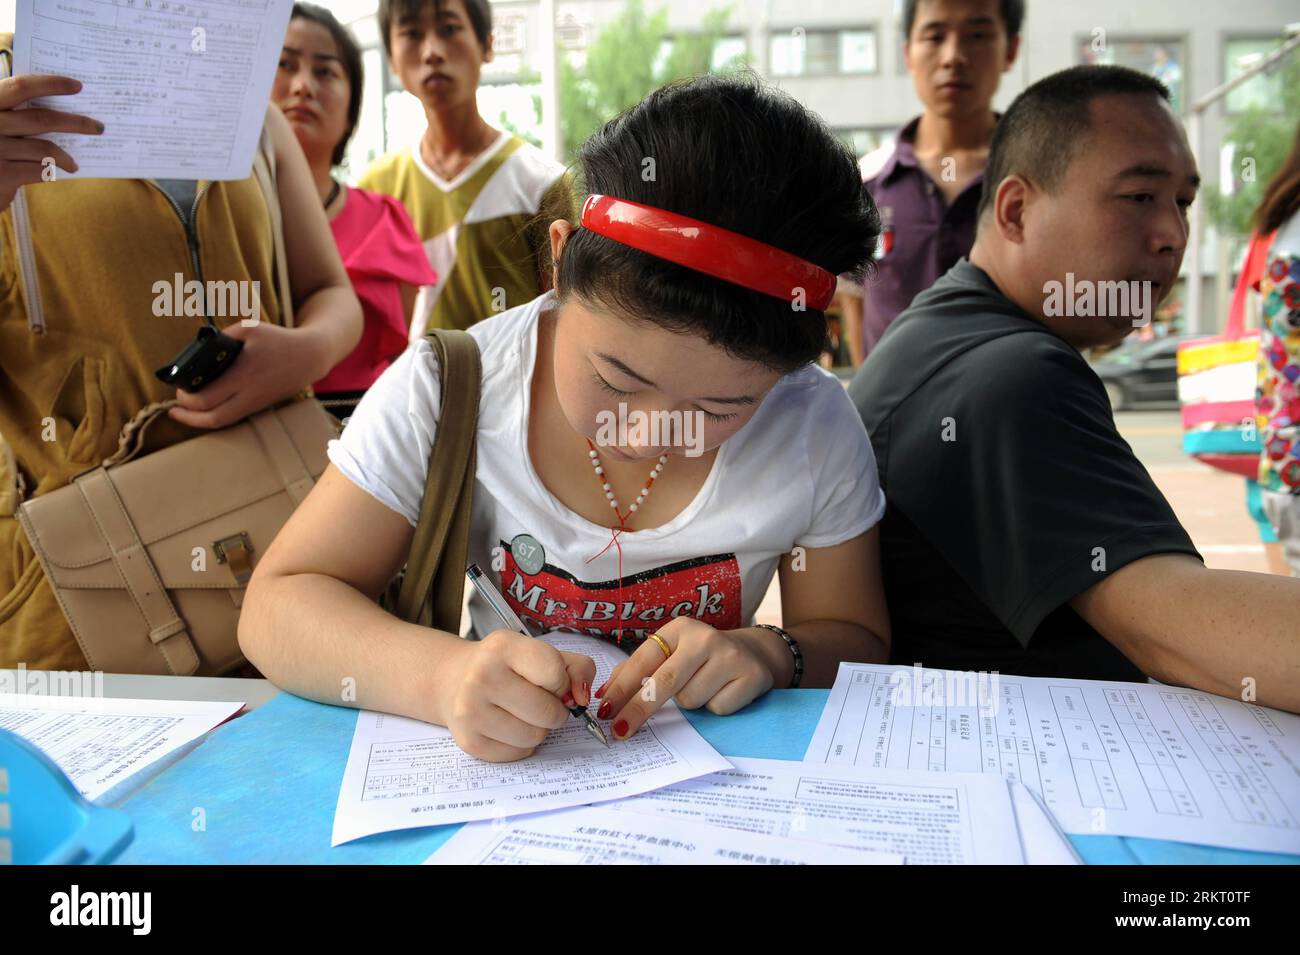 Bildnummer: 58340927  Datum: 13.08.2012  Copyright: imago/Xinhua (120813) -- TAIYUAN, Aug. 13, 2012 (Xinhua) -- A woman fills in form at a blood donation station in Taiyuan, capital of north China s Shanxi Province, Aug. 13, 2012. Many in Taiyuan donated their blood to back up reducing blood reserve in hospitals recently. (Xinhua/Fan Minda)(mcg) CHINA-TAIYUAN-BLOOD DONATION (CN) PUBLICATIONxNOTxINxCHN Gesellschaft Blutspende Blutspenden Blut Spenden xjh x0x 2012 quer      58340927 Date 13 08 2012 Copyright Imago XINHUA  Taiyuan Aug 13 2012 XINHUA a Woman fills in Shape AT a Blood Donation Stat Stock Photo